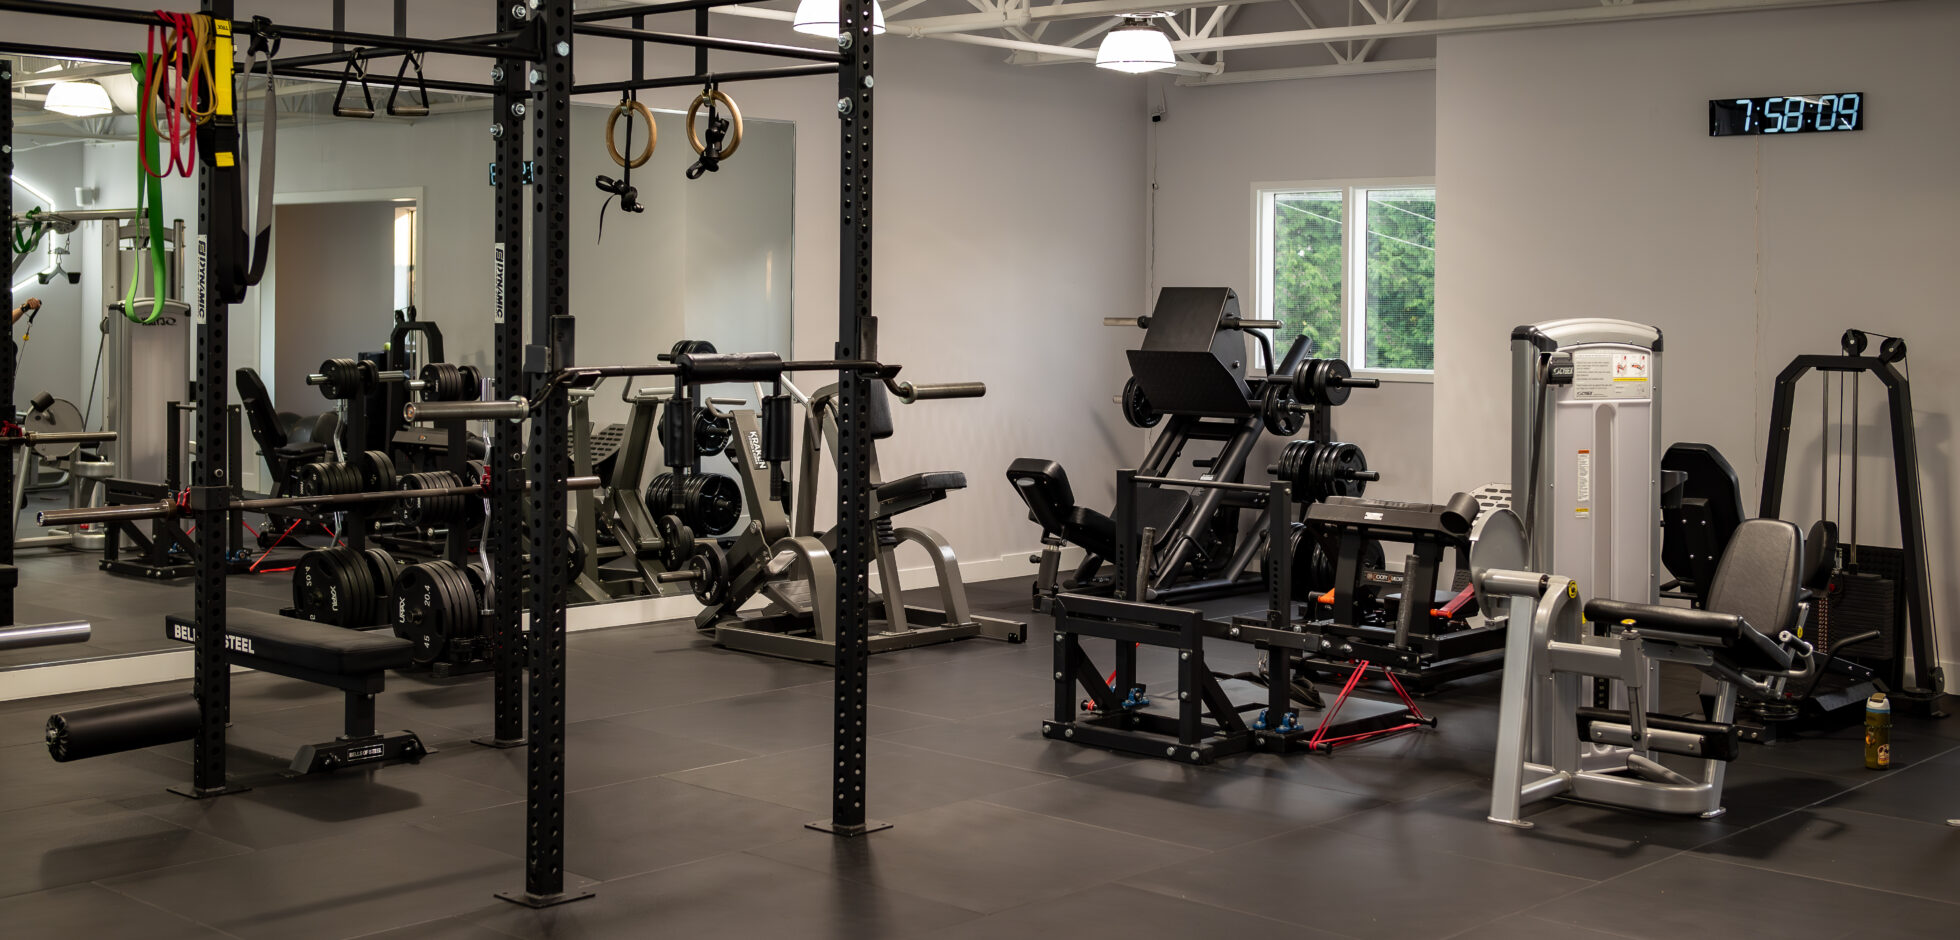 A Gym In Brentwood That Can Help With Weight Loss & Dieting